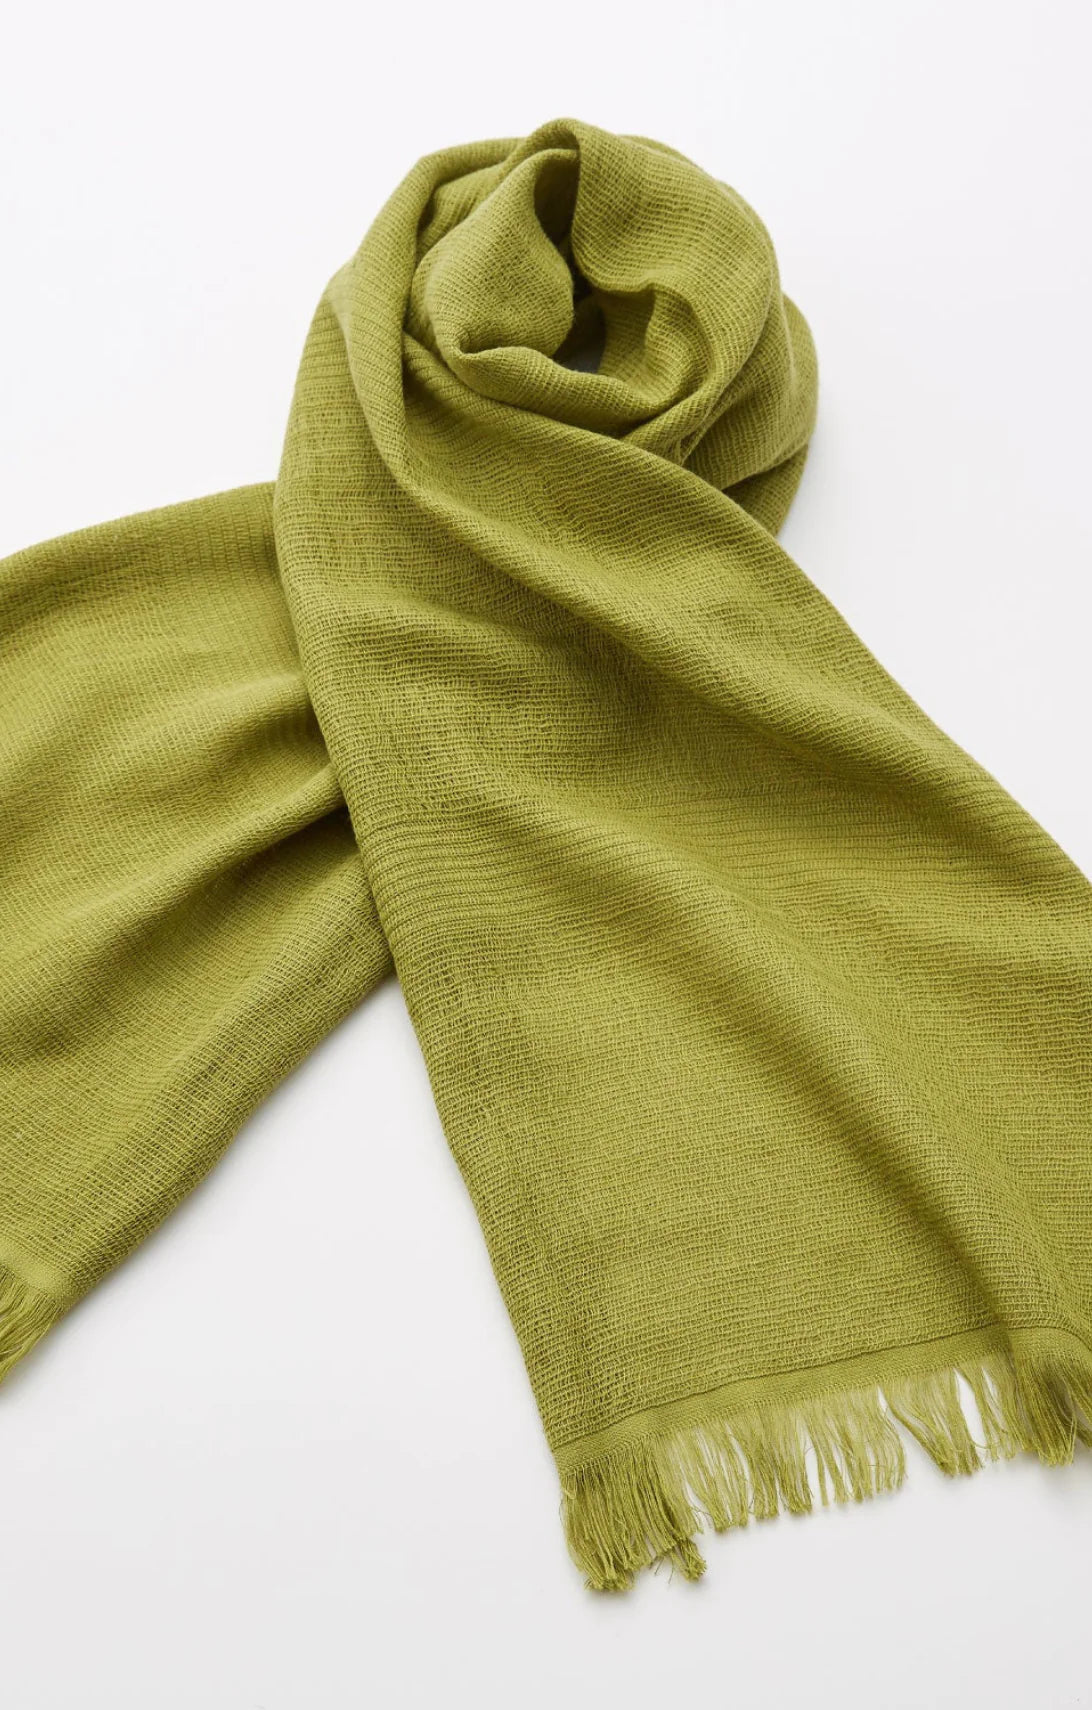 Tabbisocks' Supima Organic Cotton Scarf in Matcha color with a dull greenish tinge.